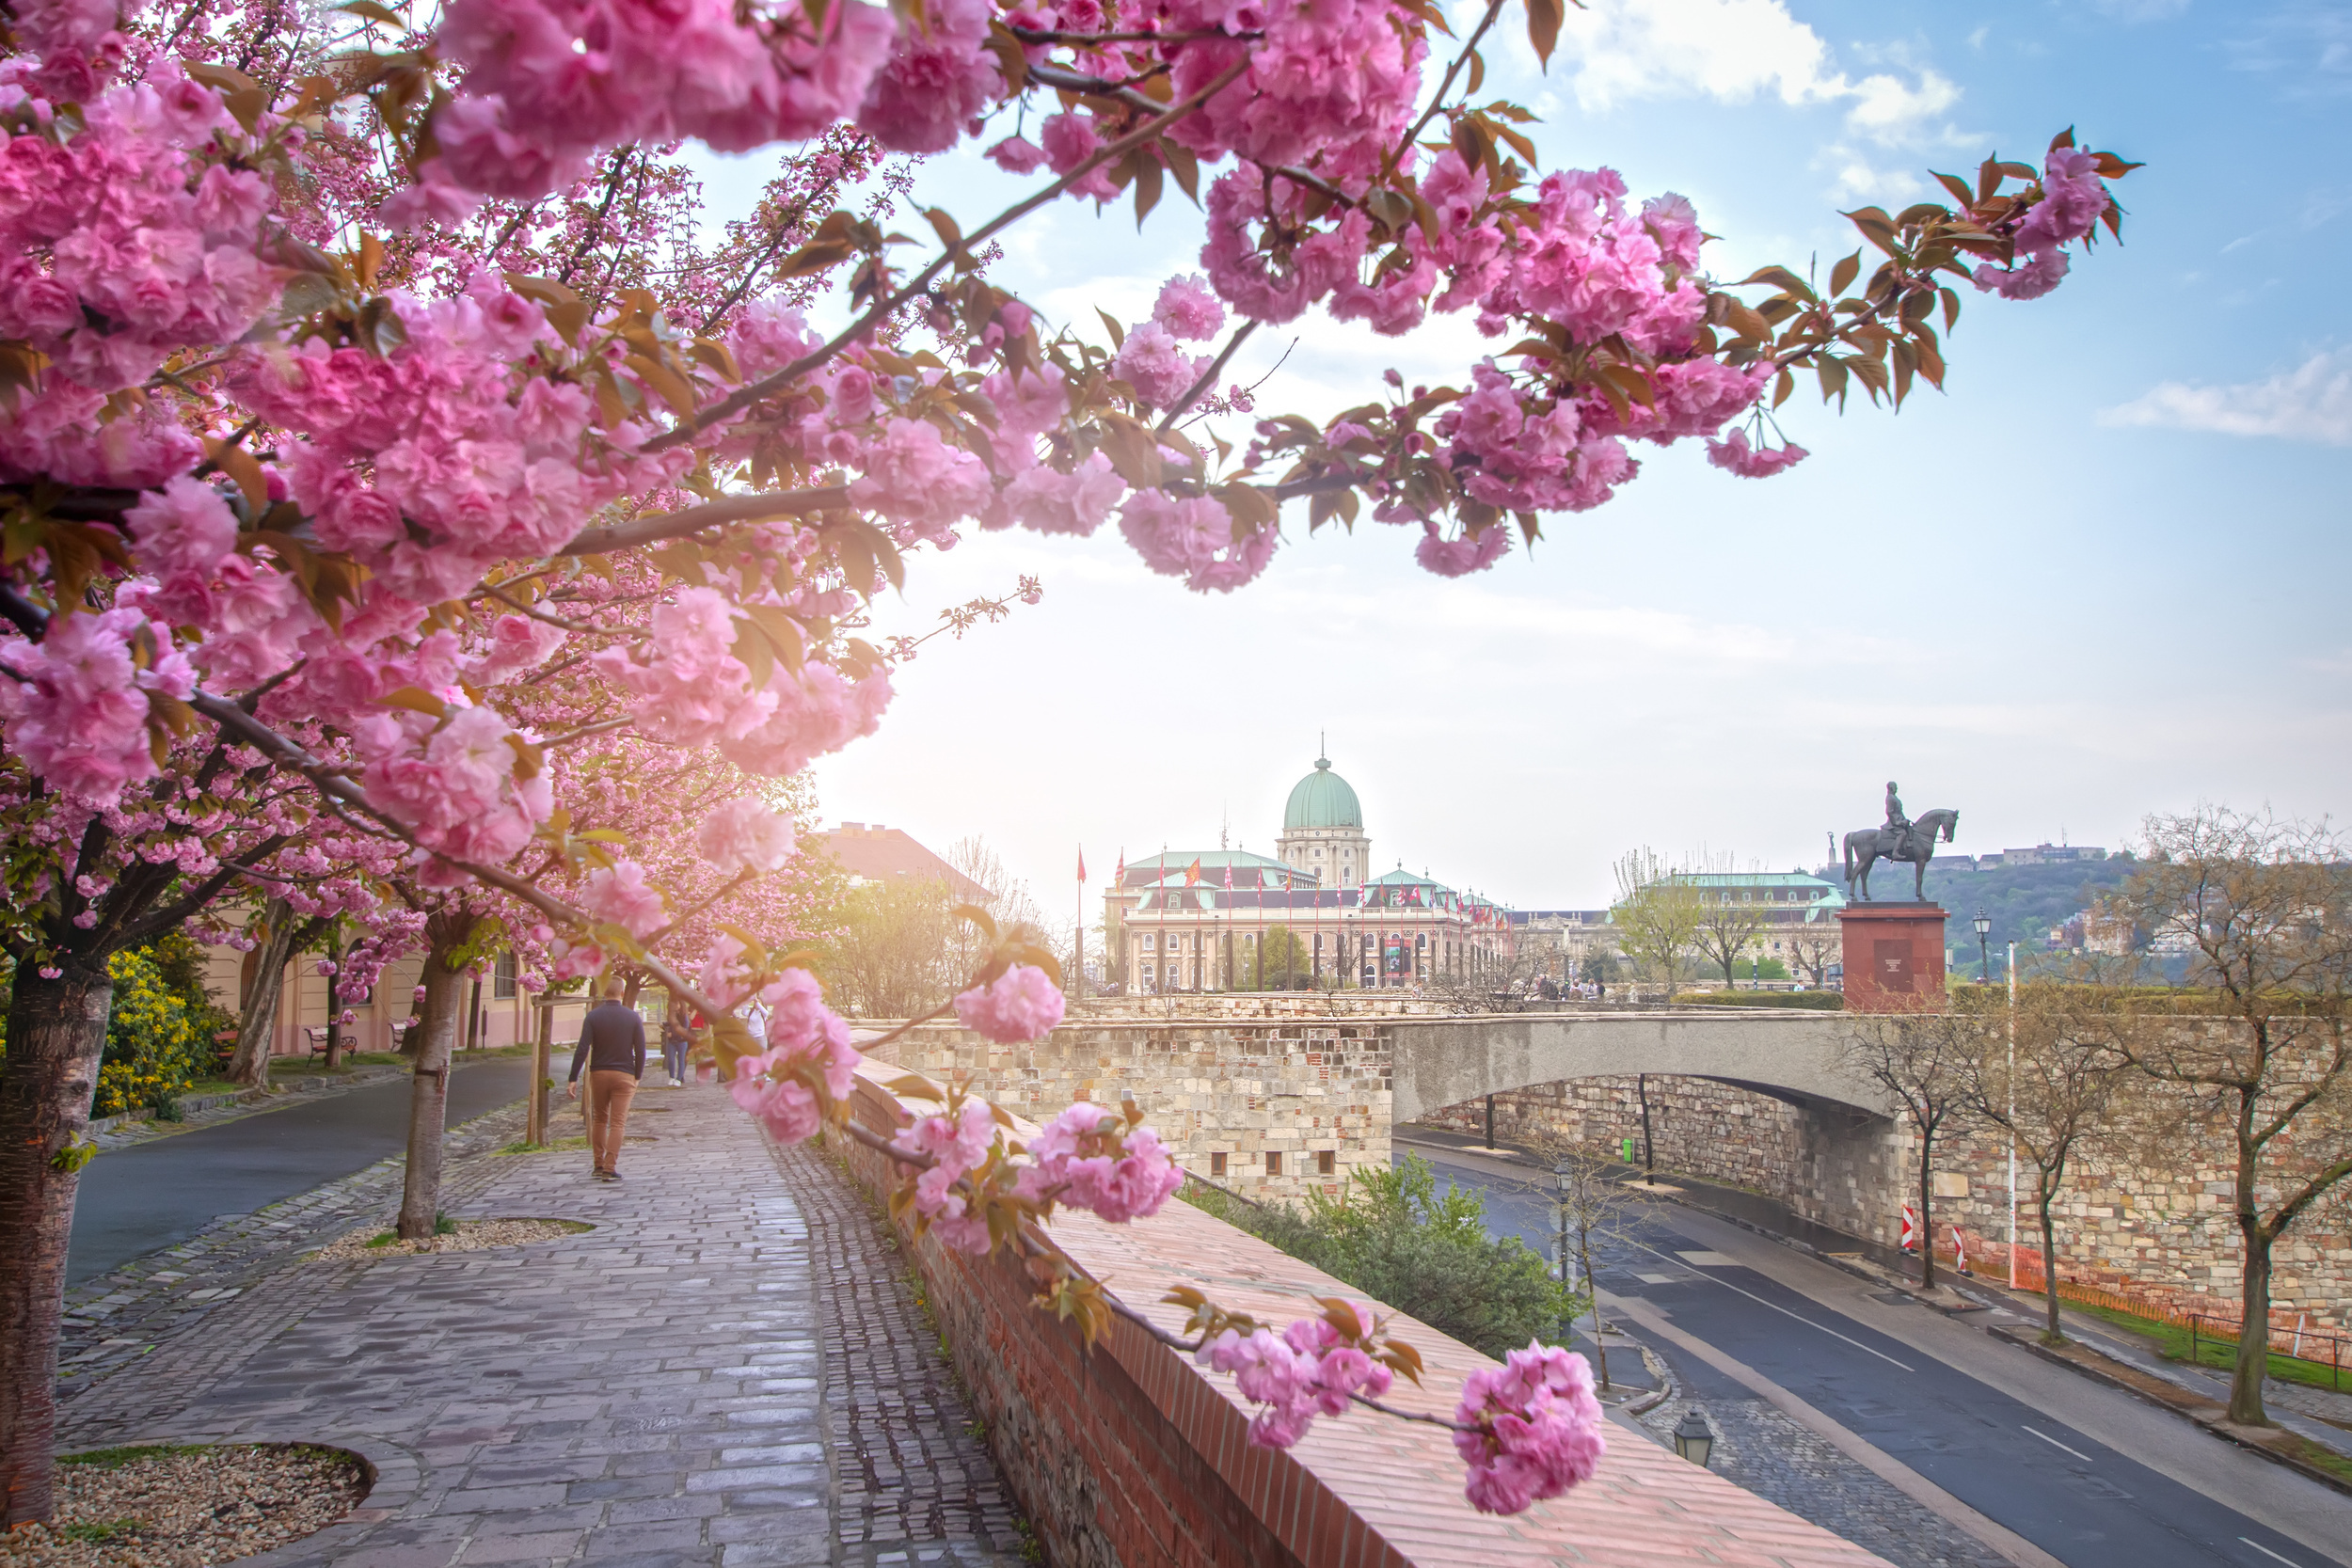 <p>Budapest has become much-loved over the years amongst travelers. The city baths, different forms of architecture, and great cafe scene are just a few reasons why. Spring is a great time to visit the city, thanks to the flowers blooming in the parks and streets.</p><p>You may also like: <a href='https://www.yardbarker.com/lifestyle/articles/11_most_scenic_pacific_northwest_road_trips_031024/s1__38393677'>11 most scenic Pacific Northwest road trips</a></p>